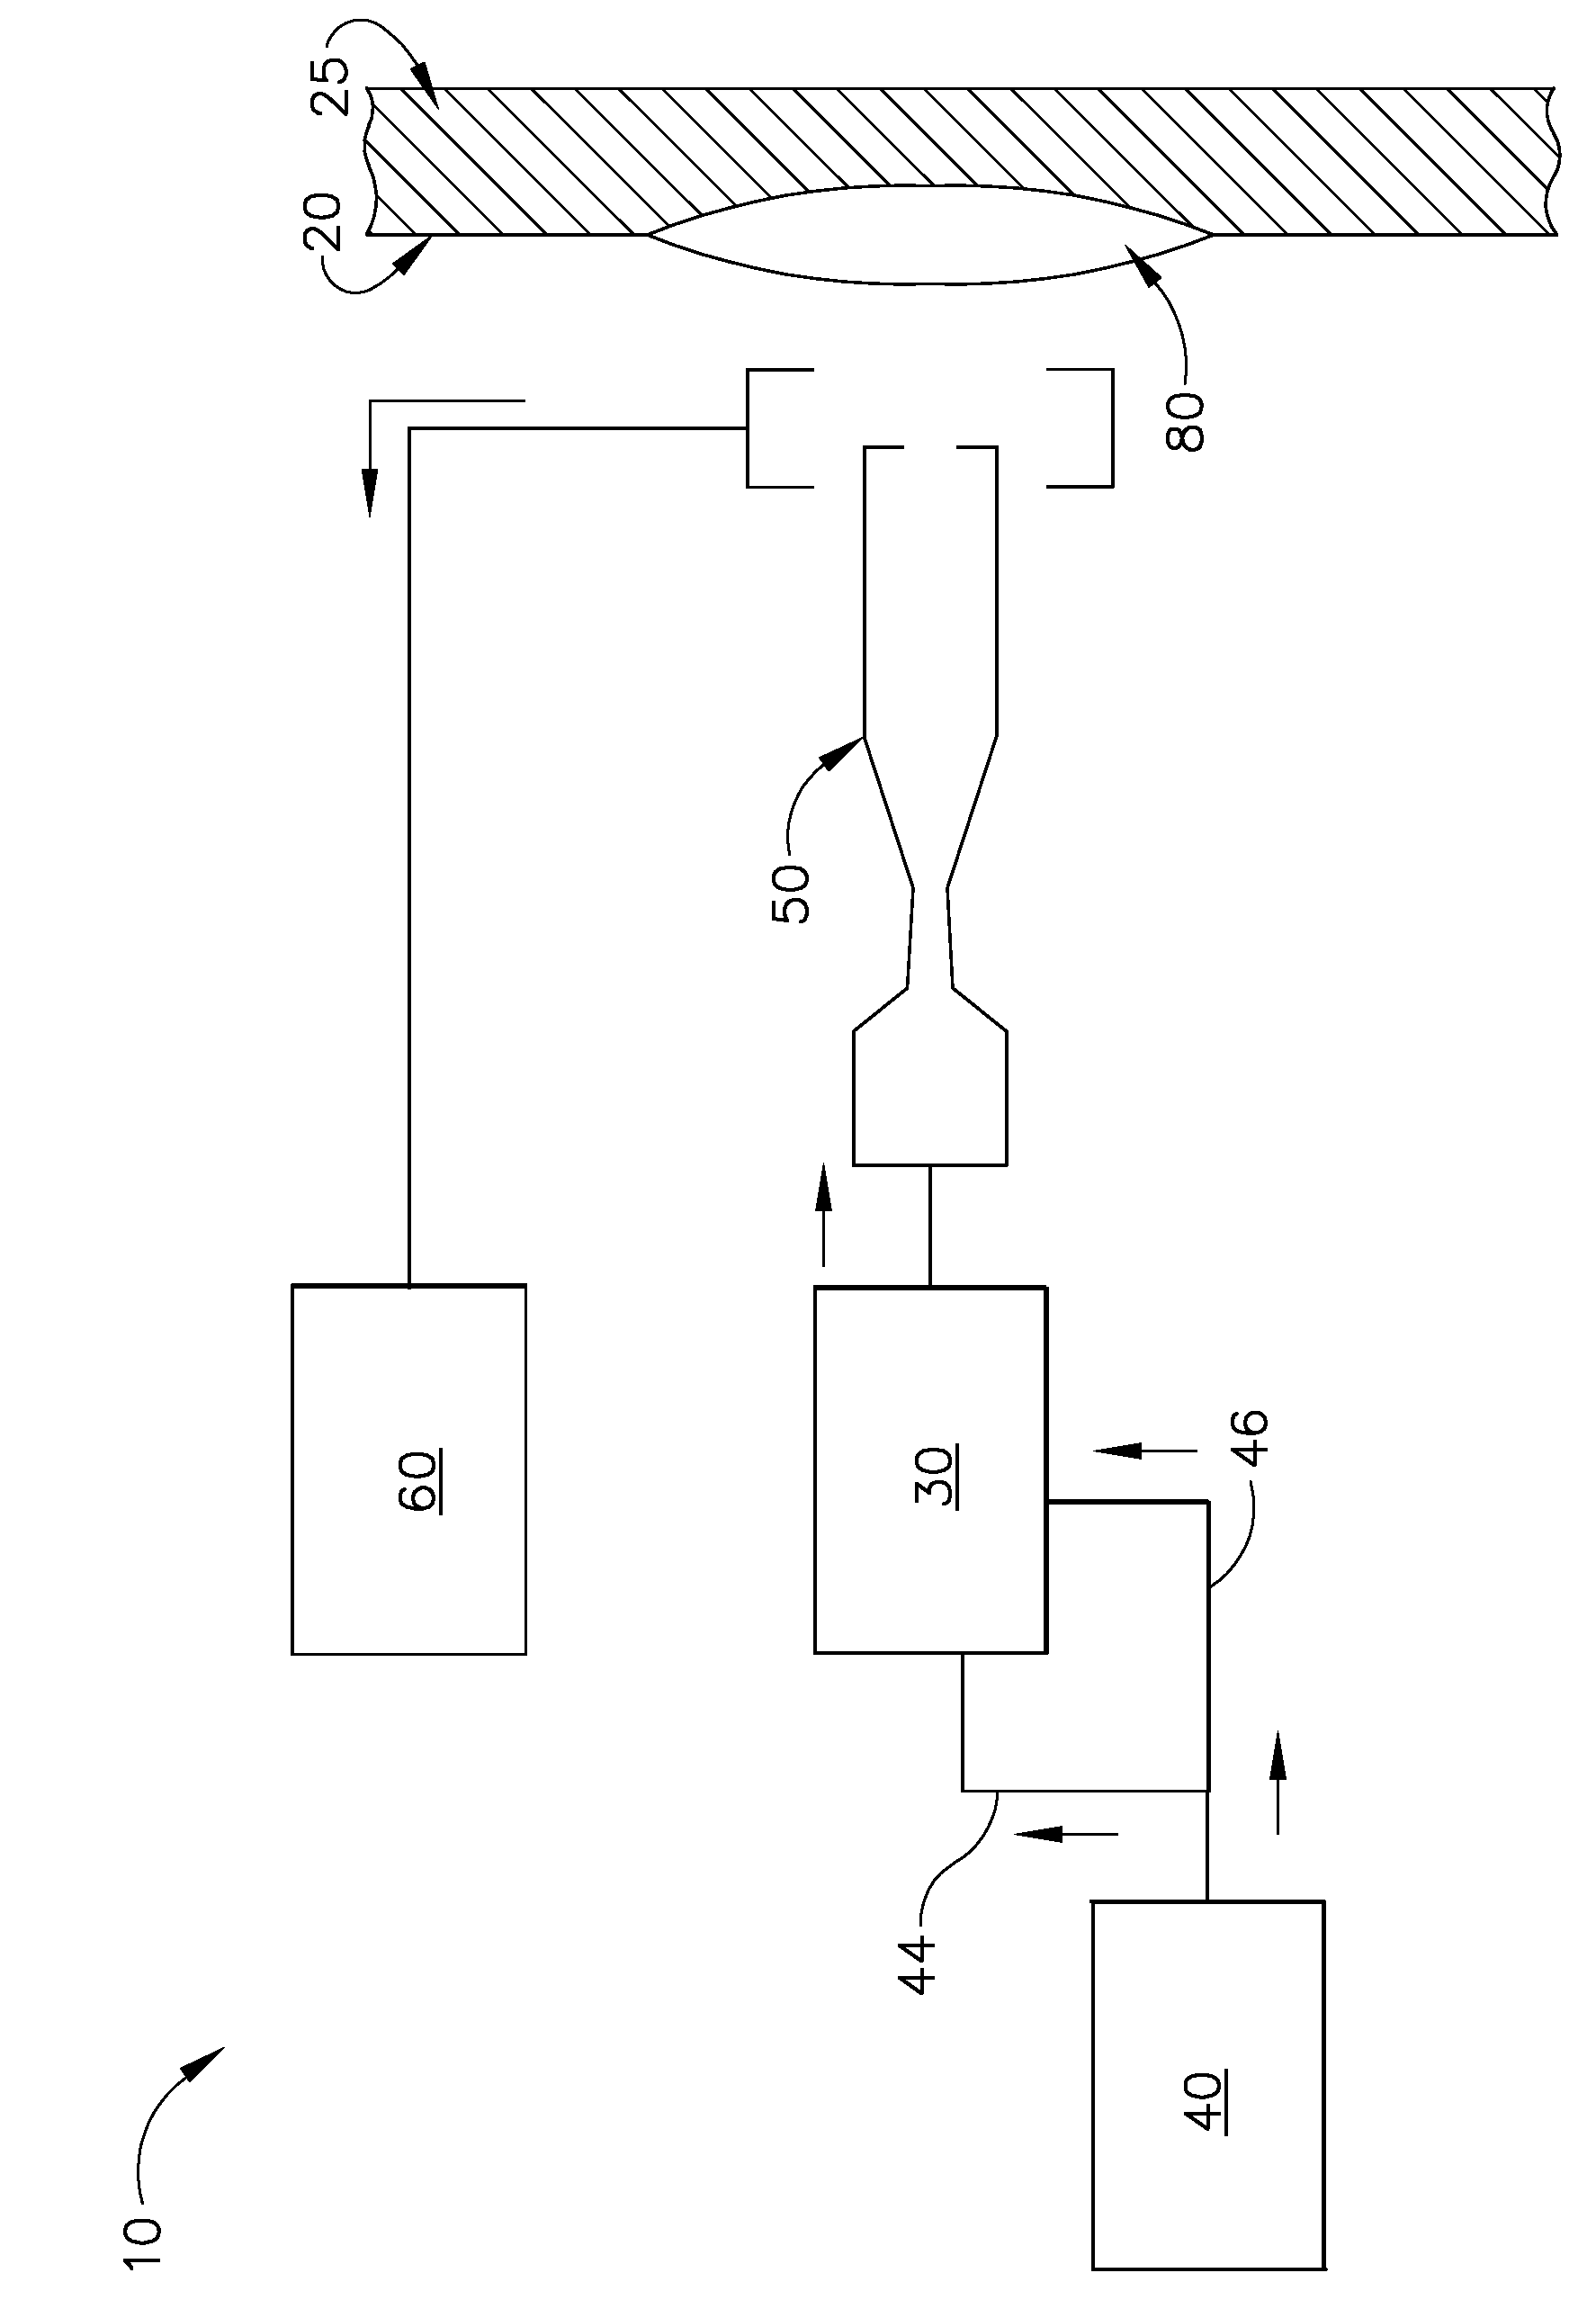 Method of applying braze filler metal powders to substrates for surface cleaning and protection